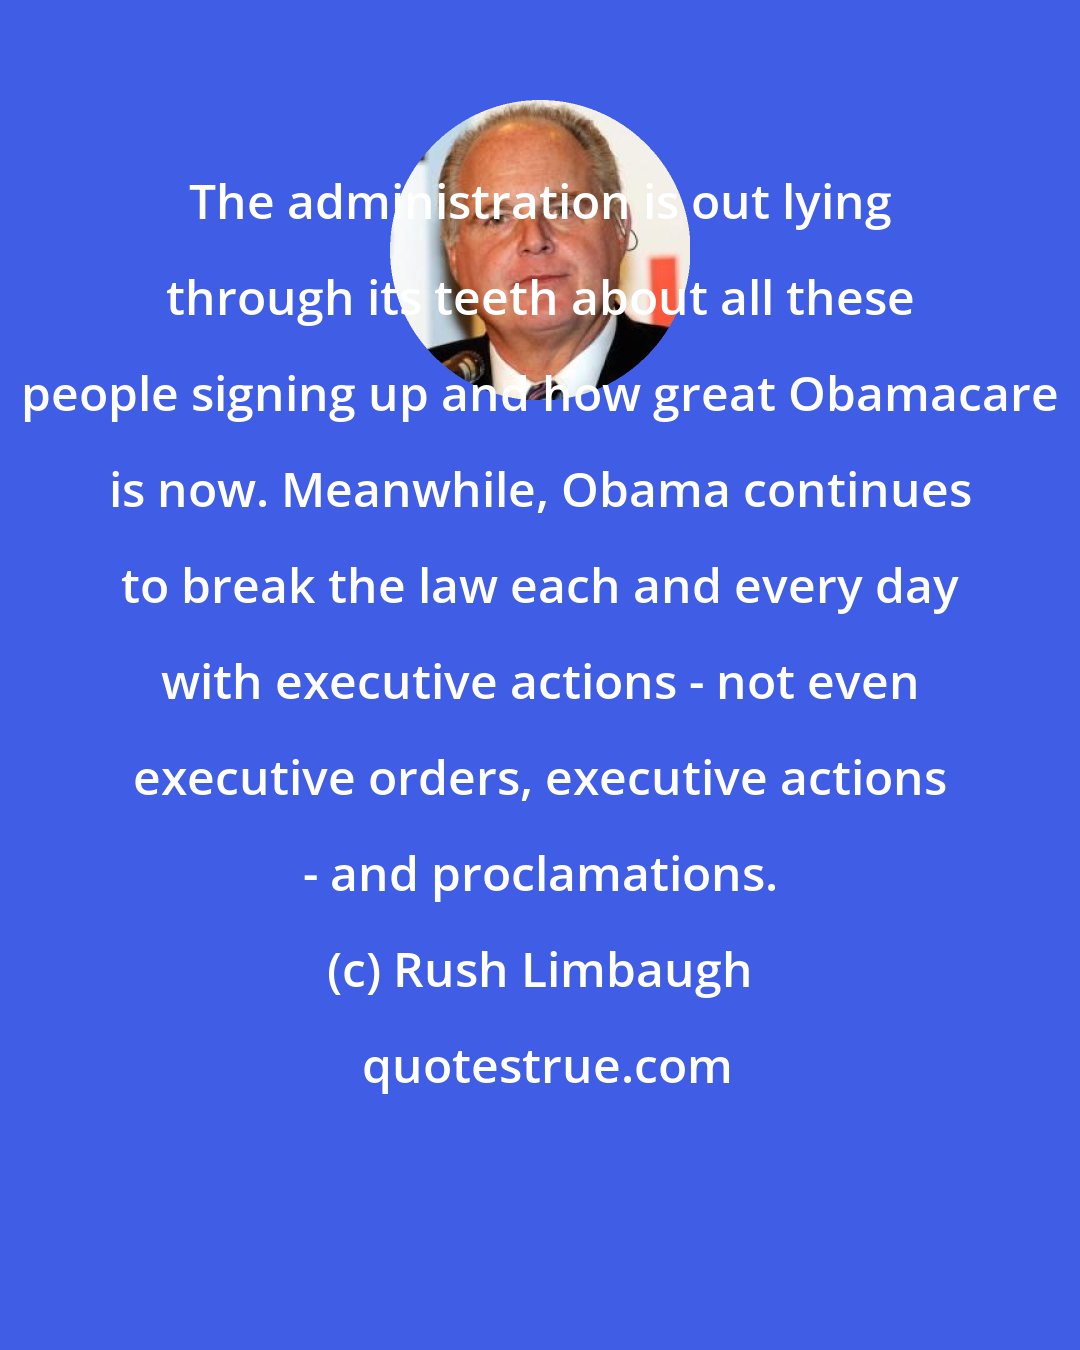 Rush Limbaugh: The administration is out lying through its teeth about all these people signing up and how great Obamacare is now. Meanwhile, Obama continues to break the law each and every day with executive actions - not even executive orders, executive actions - and proclamations.